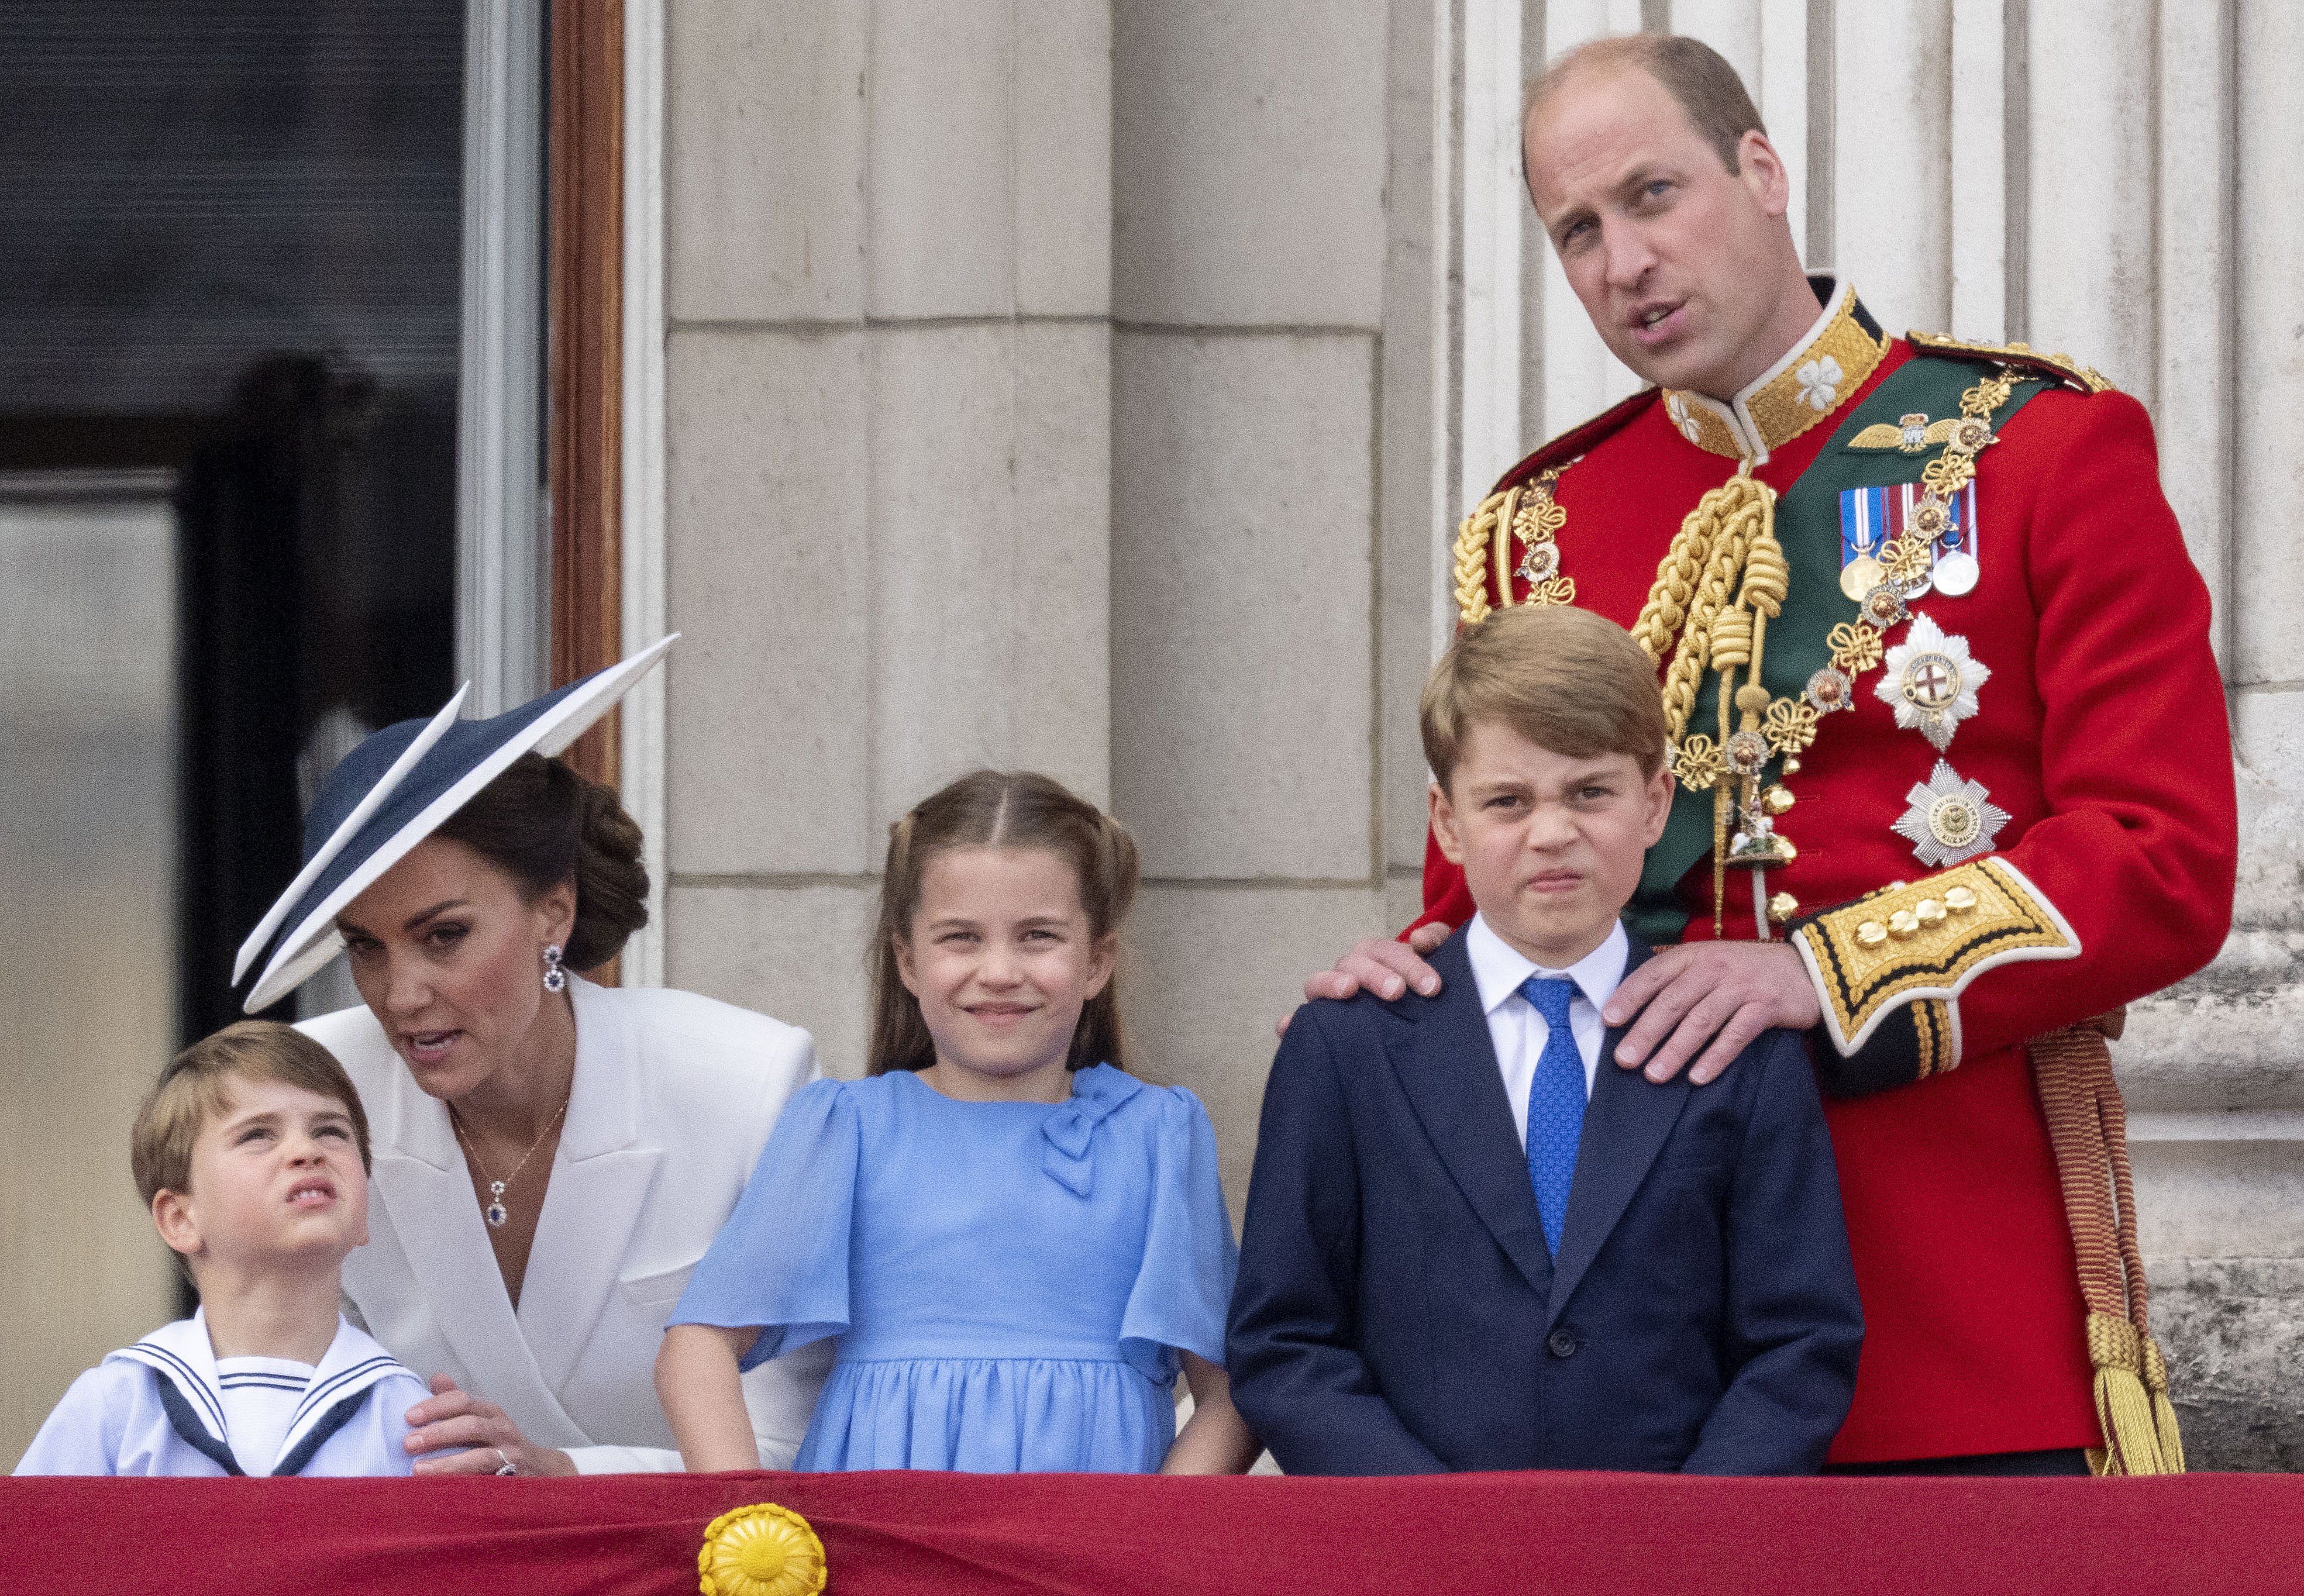 Prince William, Duke of Cambridge and Catherine, Duchess of Cambridge with Prince Louis of Cambridge, Princess Charlotte of Cambridge and Prince George of Cambridge during Trooping the Color on June 2, 2022 in London, England |  Source: Getty Images